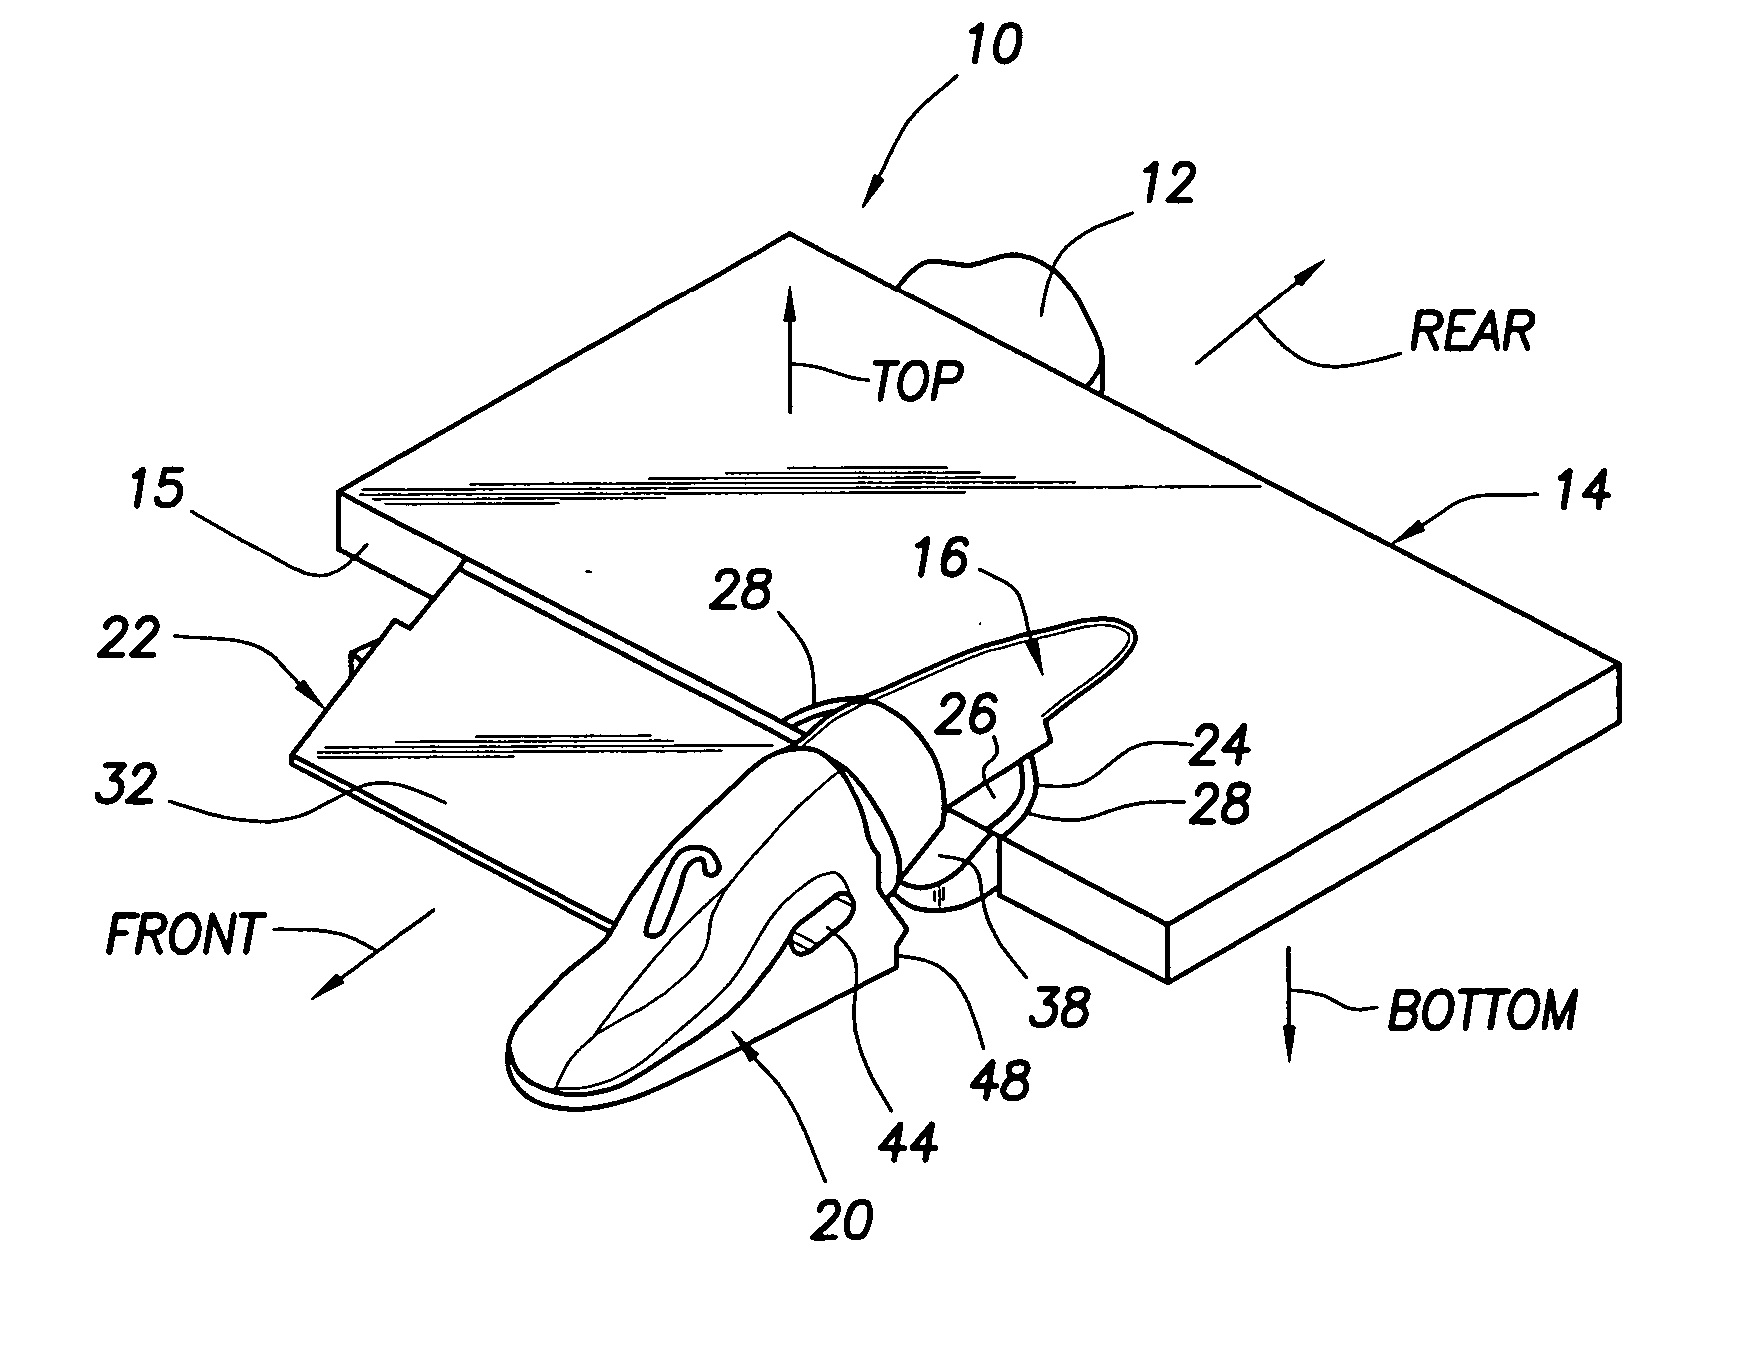 Excavating lip-mounted adapter and associated connection and shielding apparatus